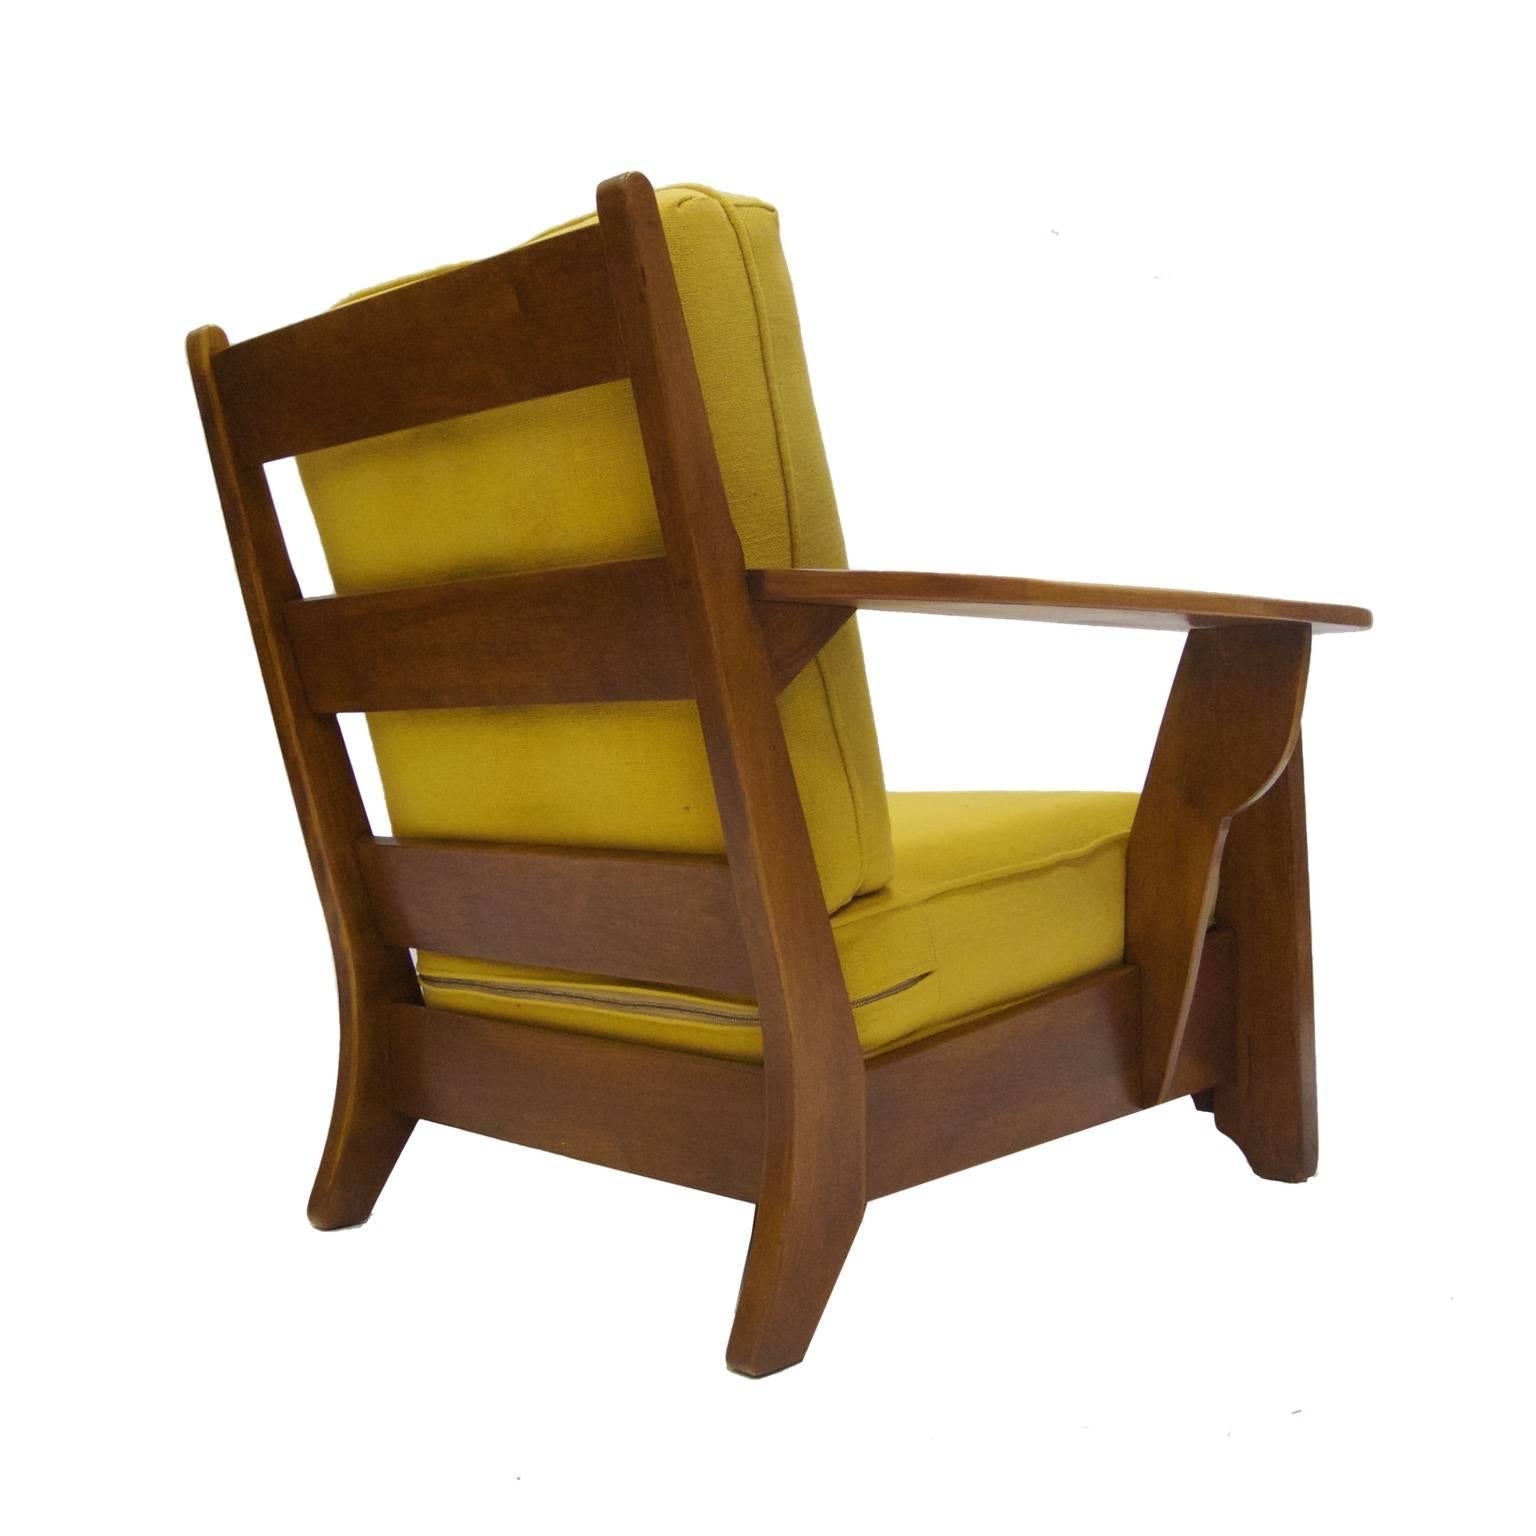 chair with wide arms